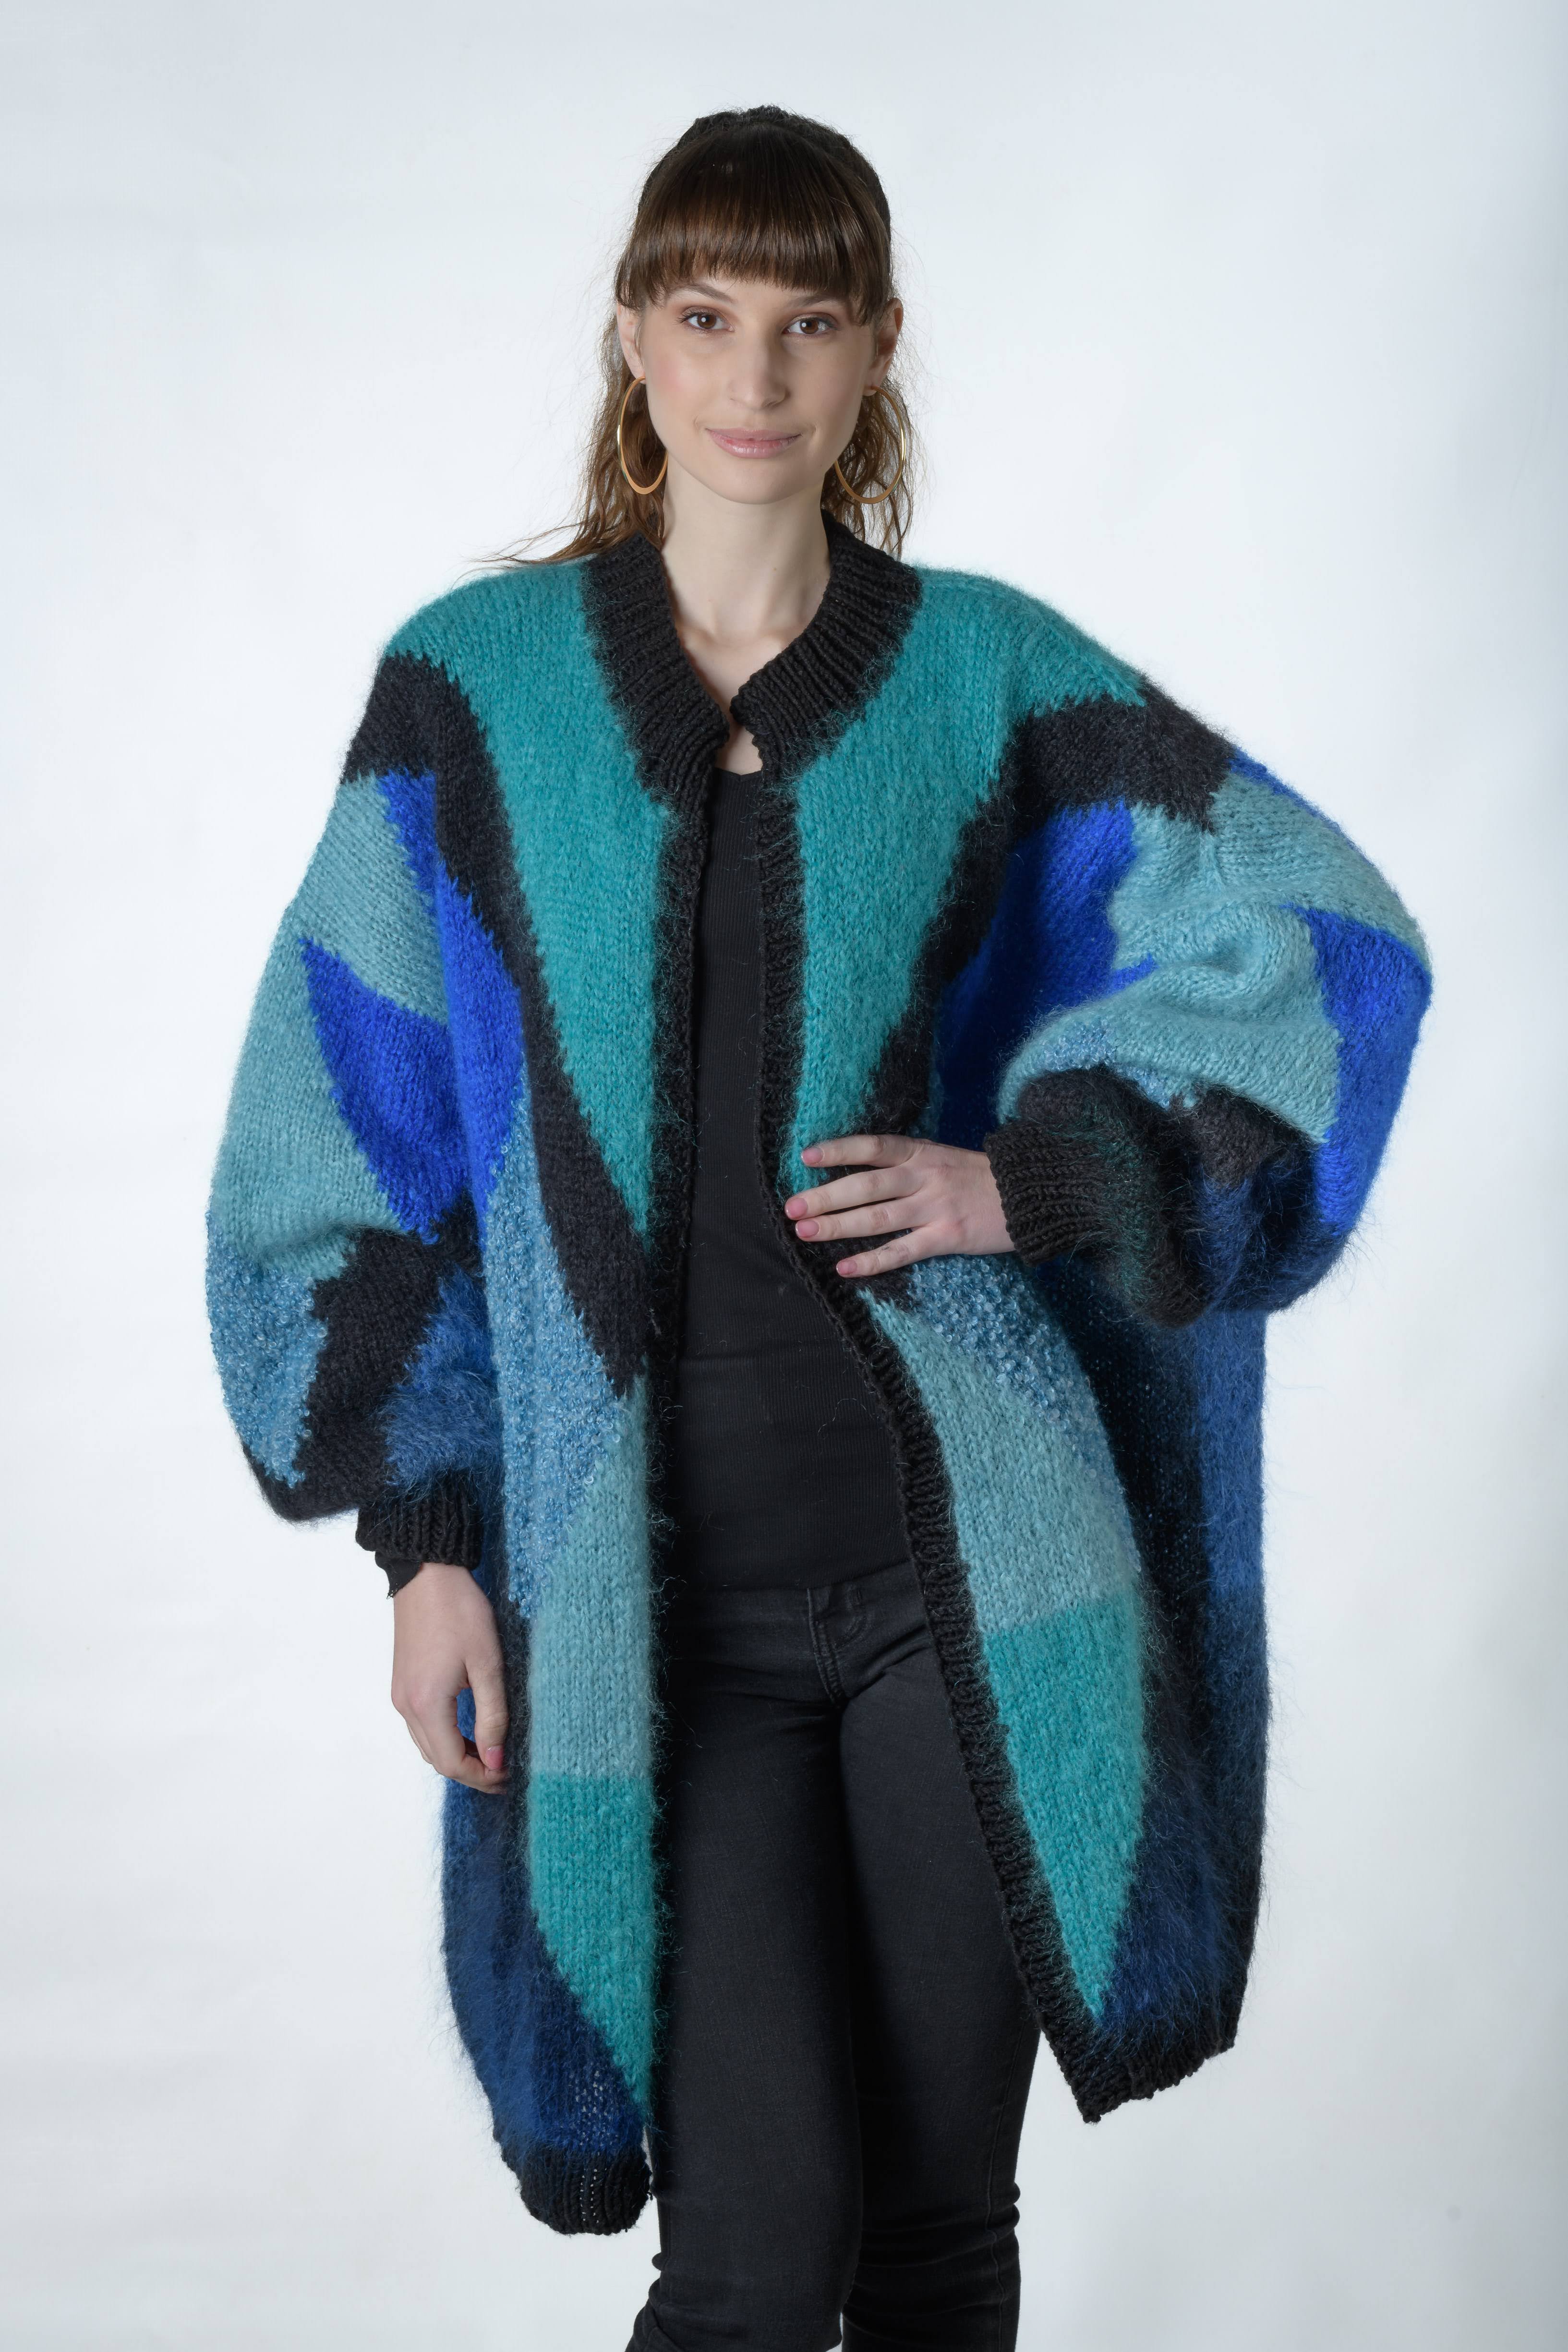 Black and blue mohair cardigan